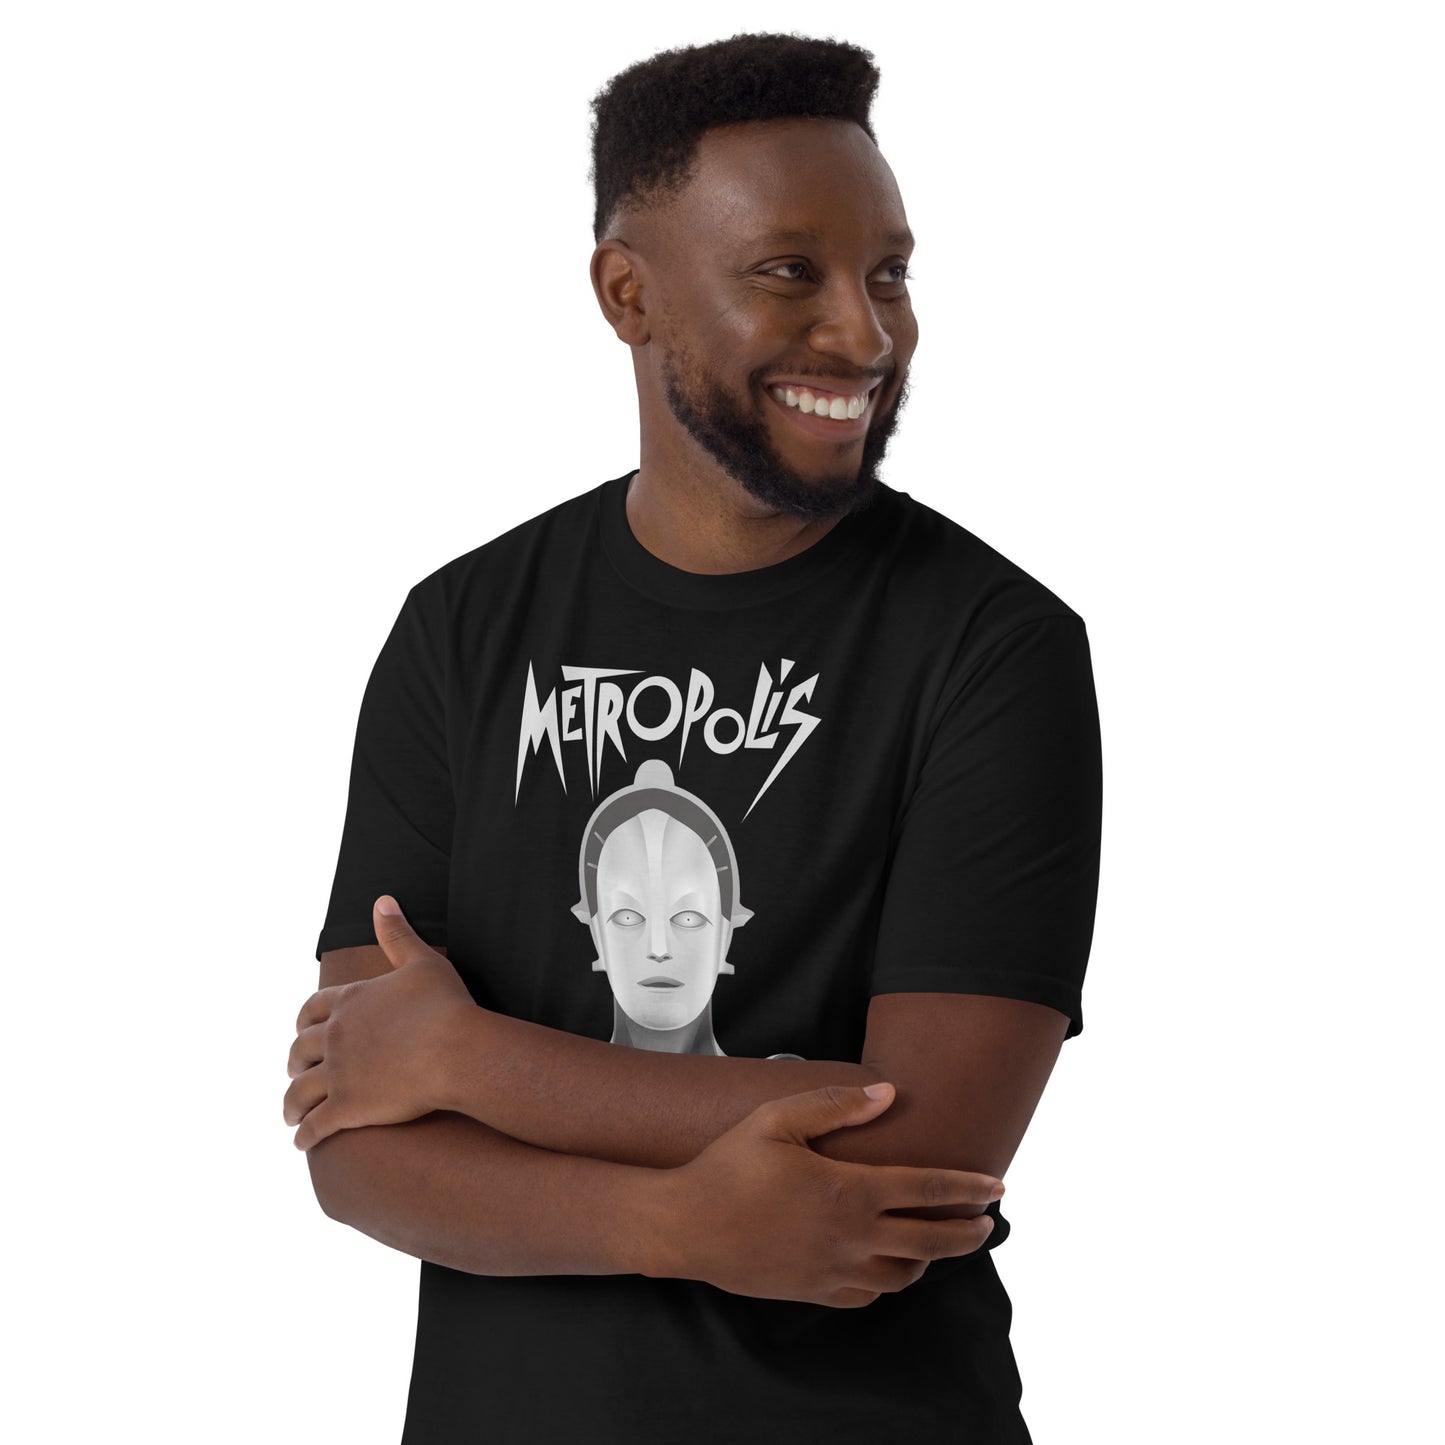 The Mediator Between the Head and the Hands Must be the Heart, Metropolis 1927 Short-Sleeve Unisex T Shirt